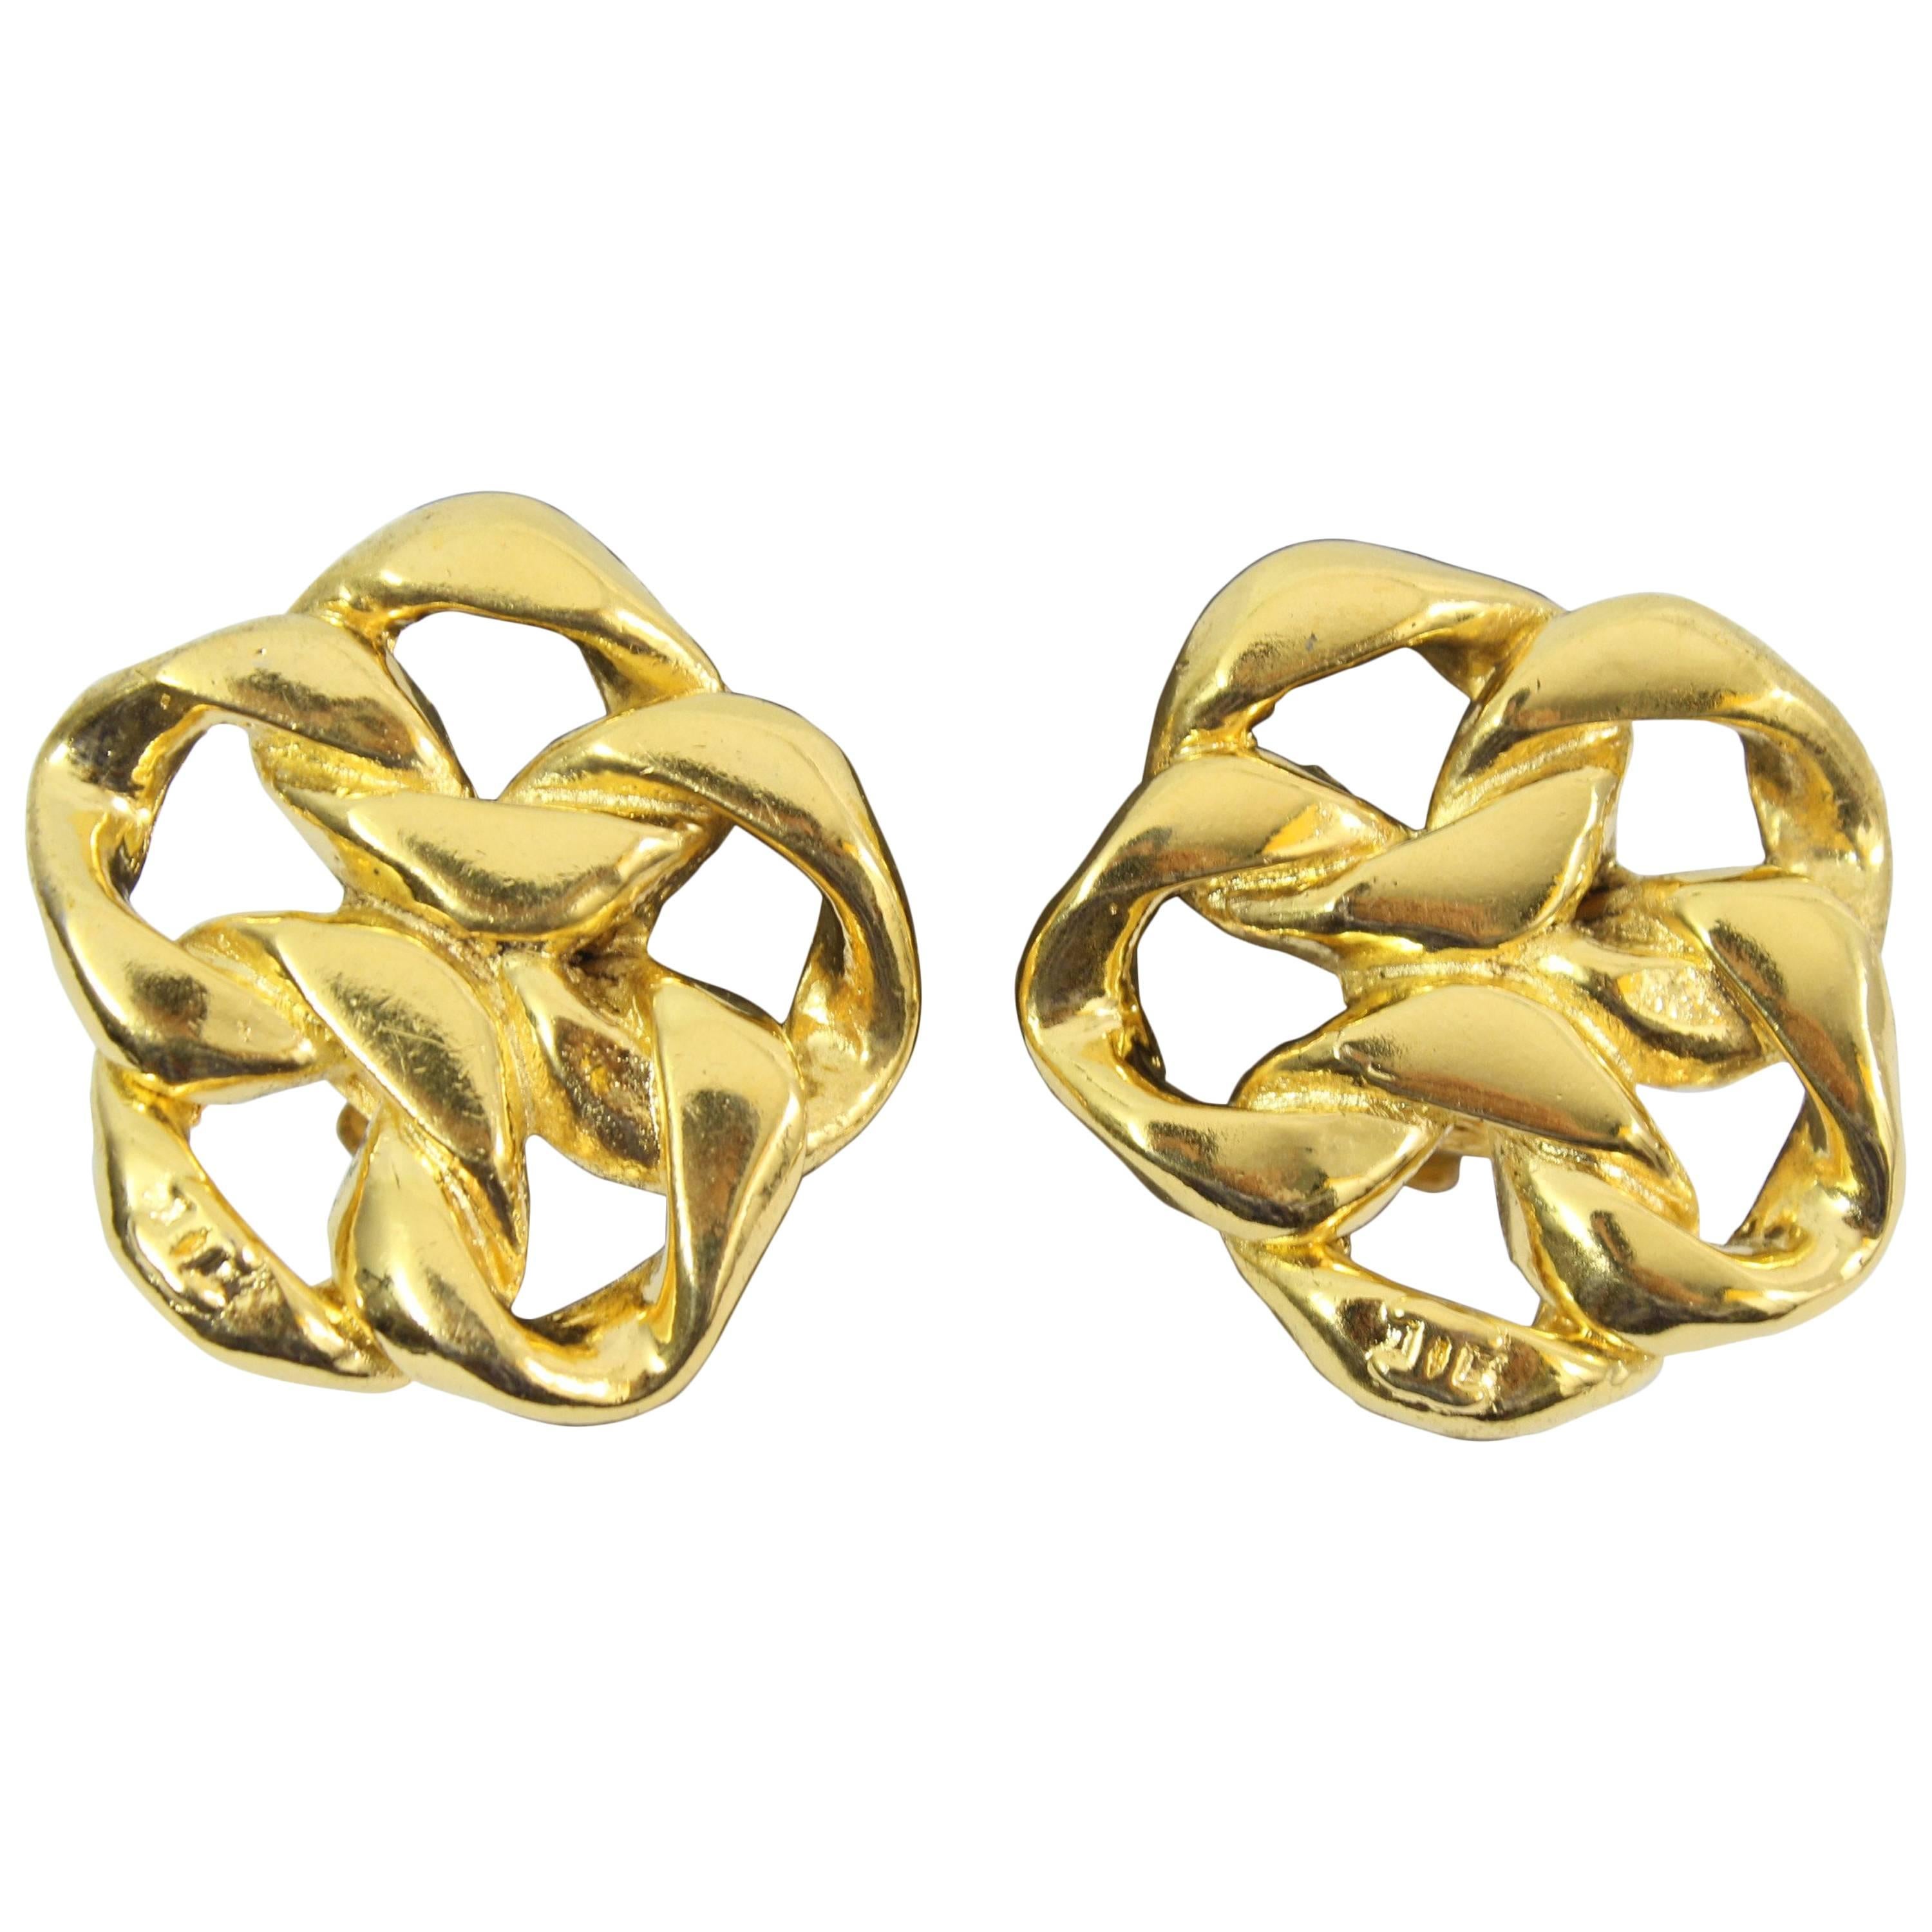 Chanel Chain  Vintage  Earrings in Gold Plated Metal